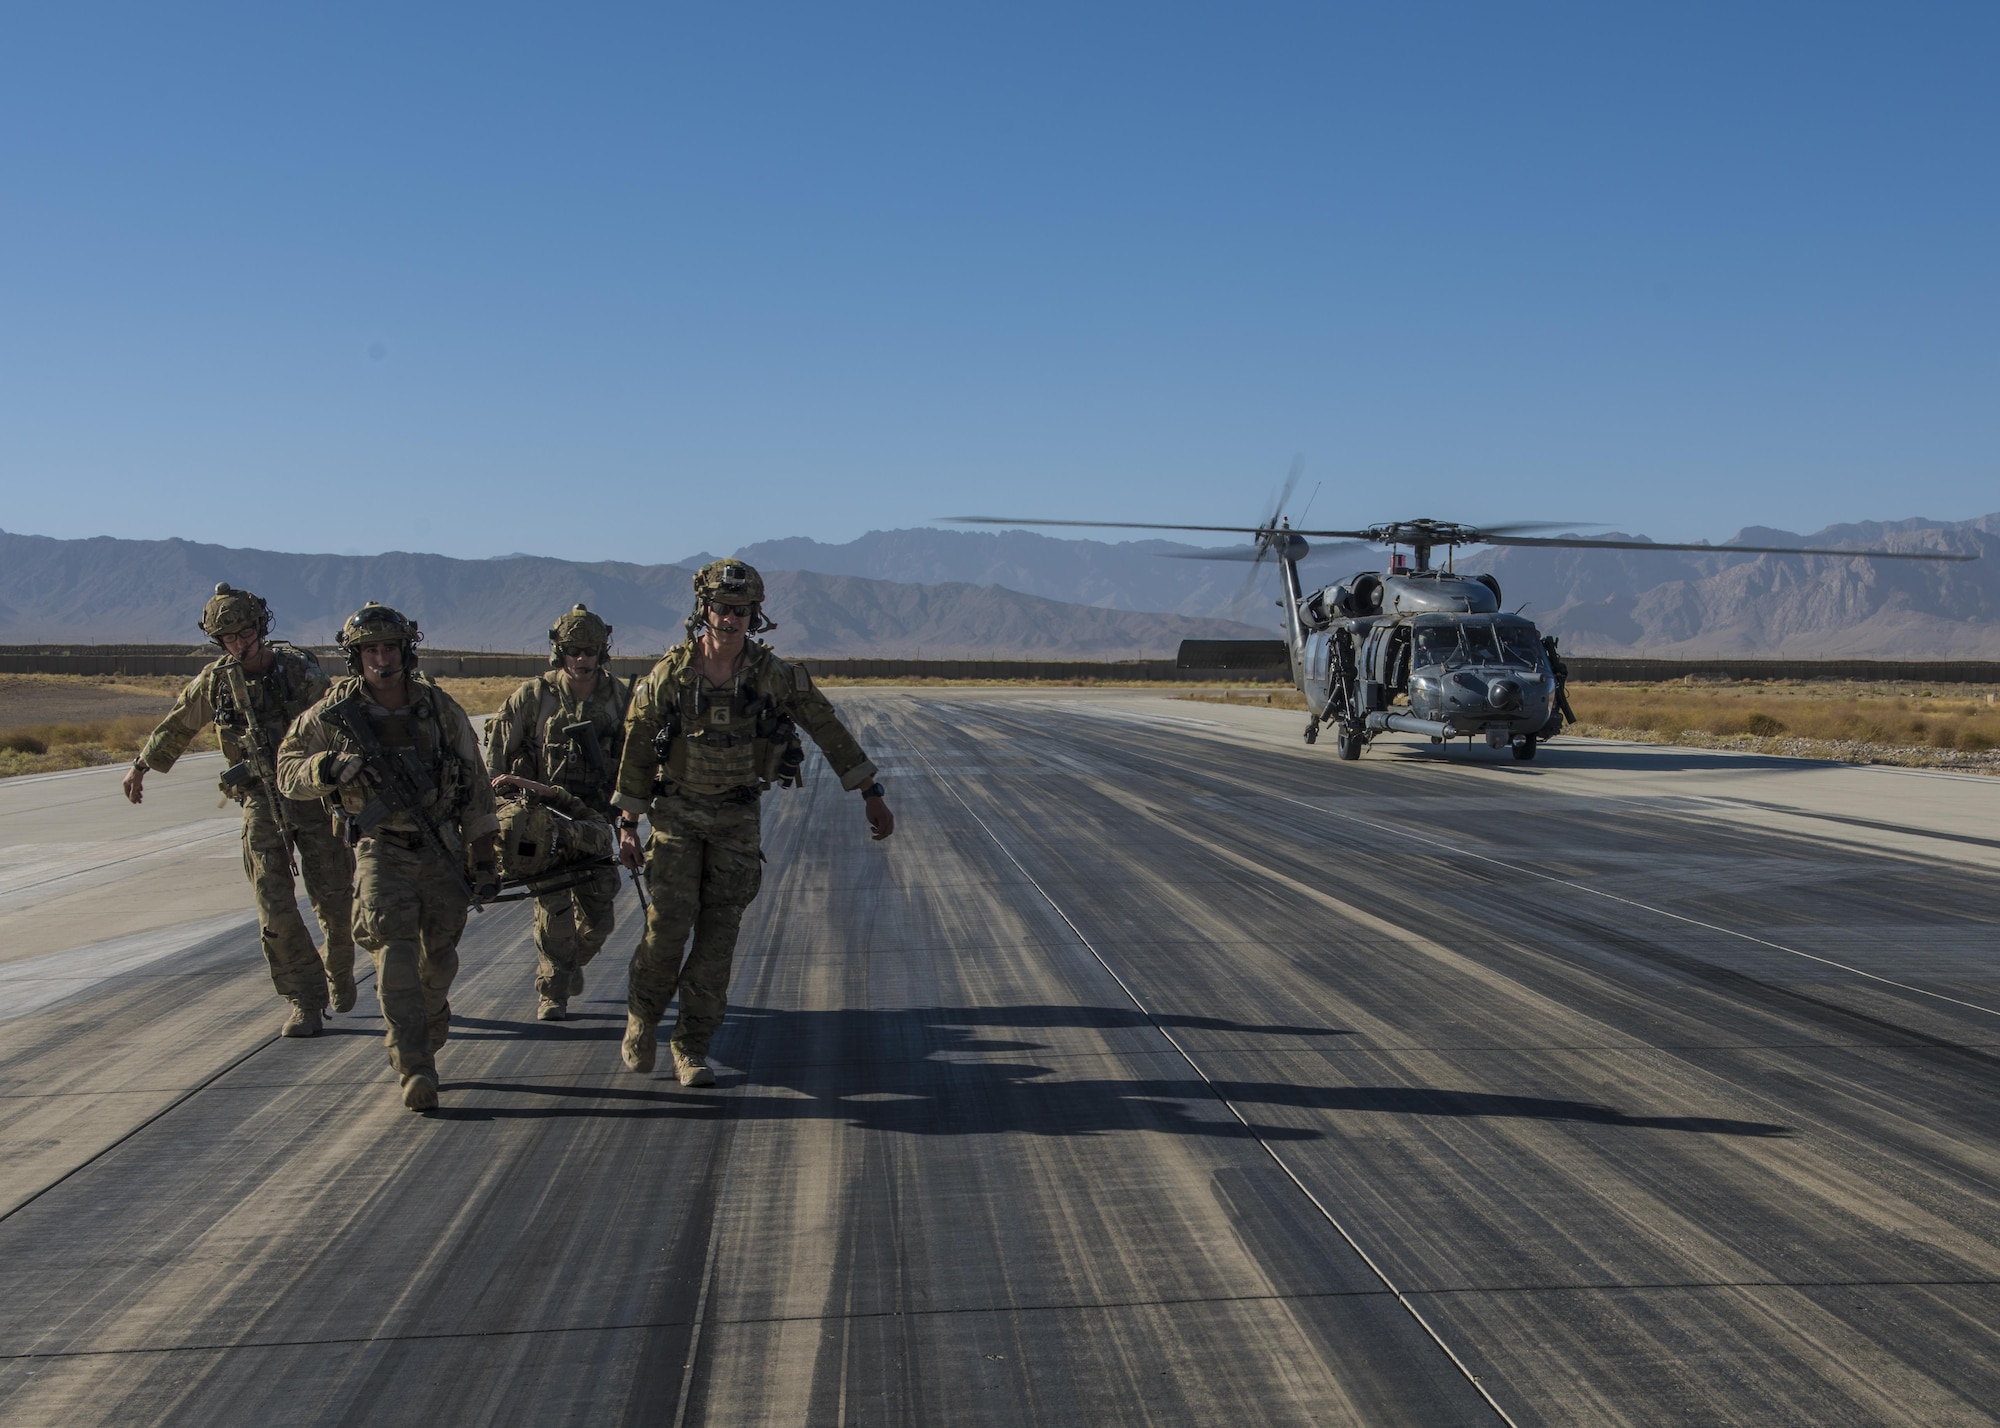 Pararescuemen from the 83rd Expeditionary Rescue Squadron carry a simulated wounded patient during a recovery exercise, Bagram Airfield, Afghanistan, Sept. 03, 2016. Airmen from the 83rd ERQS, 774th Expeditionary Airlift Squadron, and 455th Expeditionary Aeromedical Evacuation Squadron, conducted a first of its kind mission rehearsal. The mission rehearsal integrated the various units to conduct an aerial insertion of an Air Force personnel recovery team. (U.S. Air Force photo by Senior Airman Justyn M. Freeman)